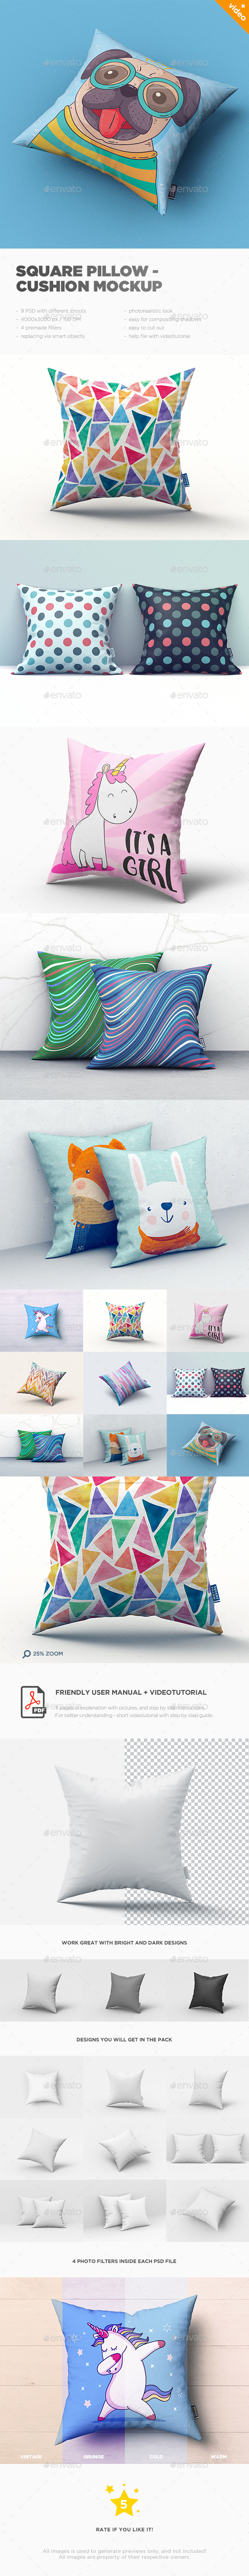 Download Square Pillow Cushion Mockup By Goner13 Graphicriver